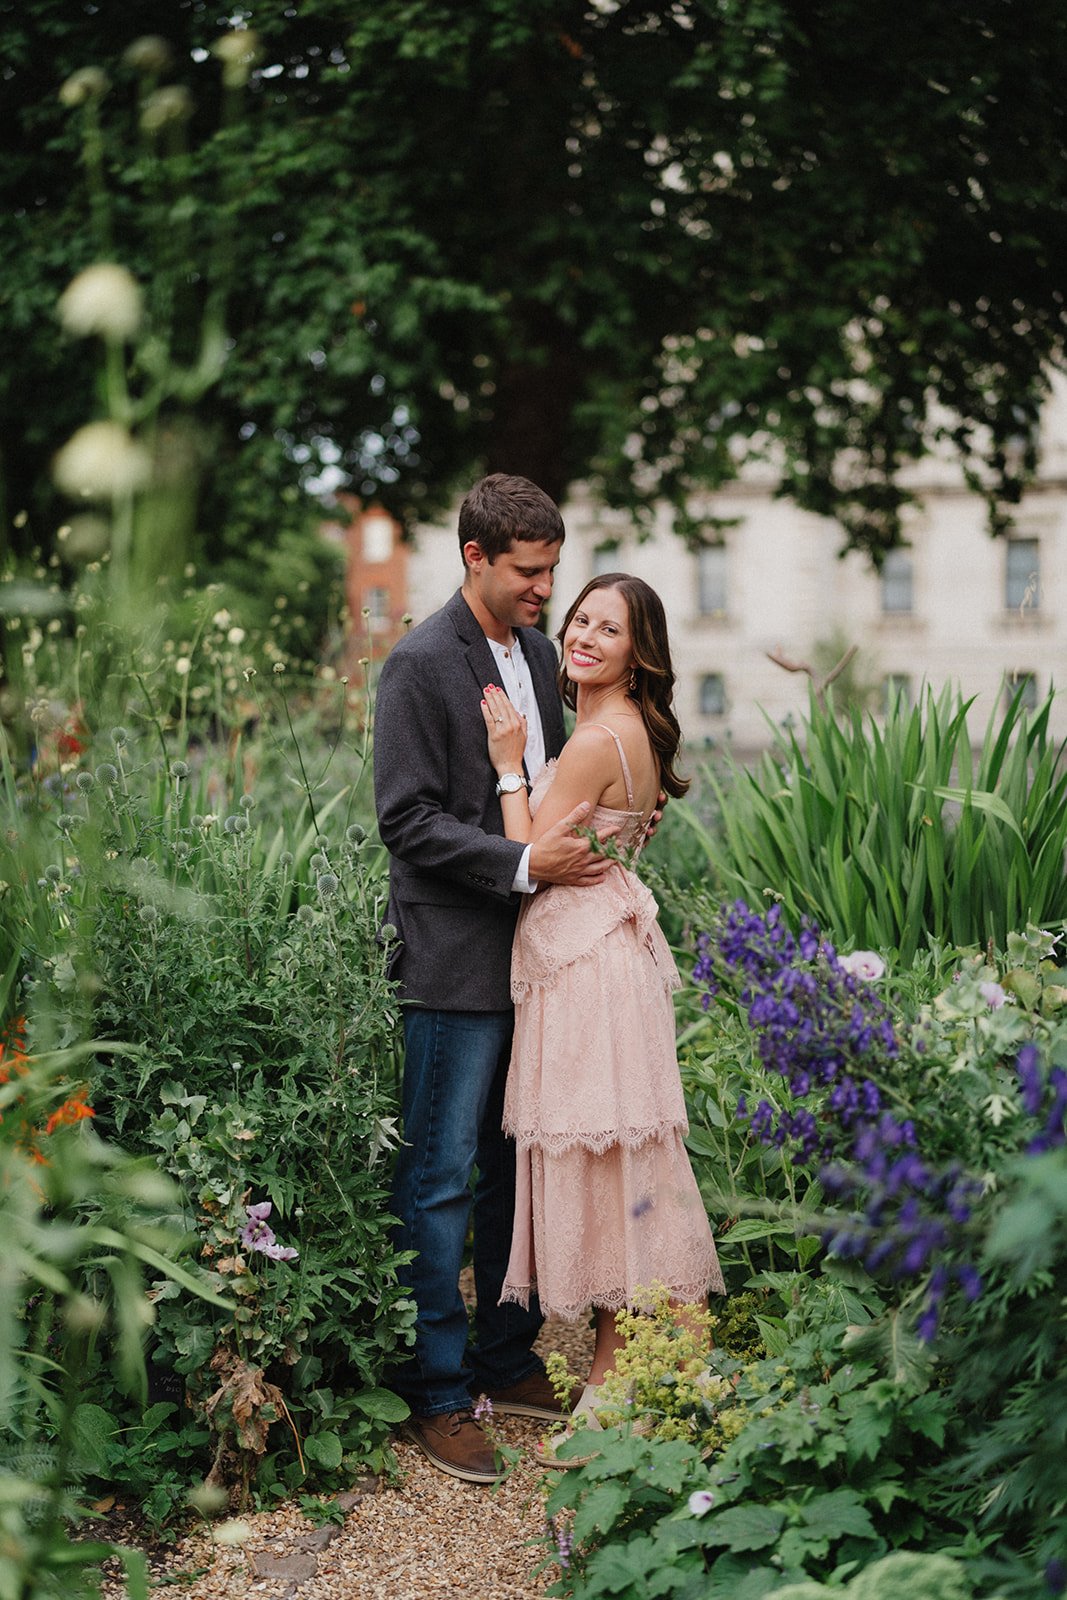 Engagement photoshoot in St. James Park, London